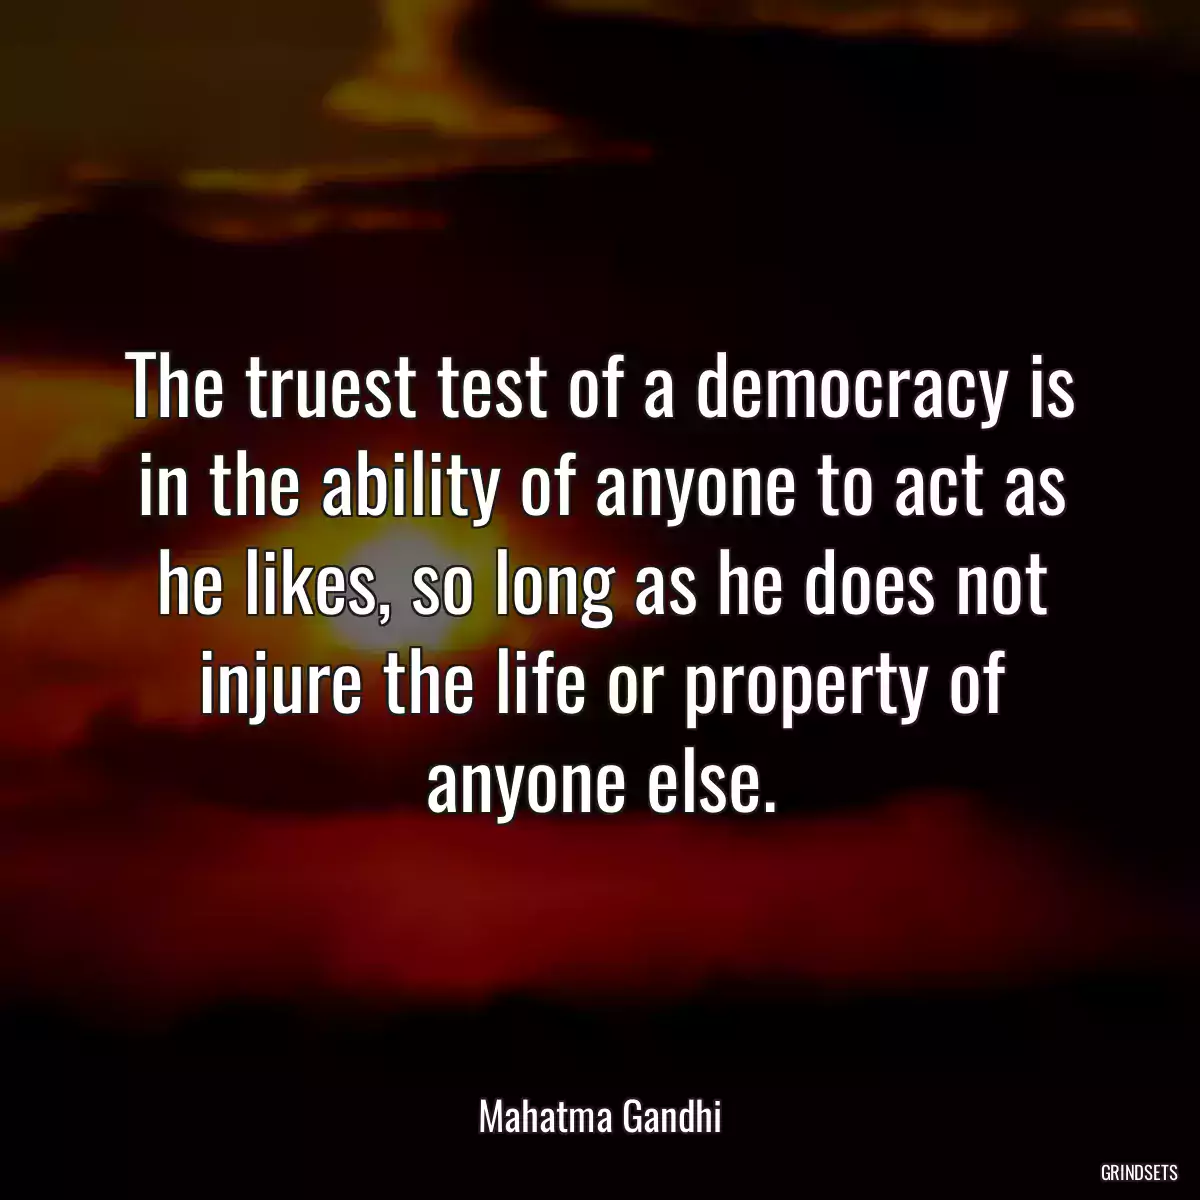 The truest test of a democracy is in the ability of anyone to act as he likes, so long as he does not injure the life or property of anyone else.